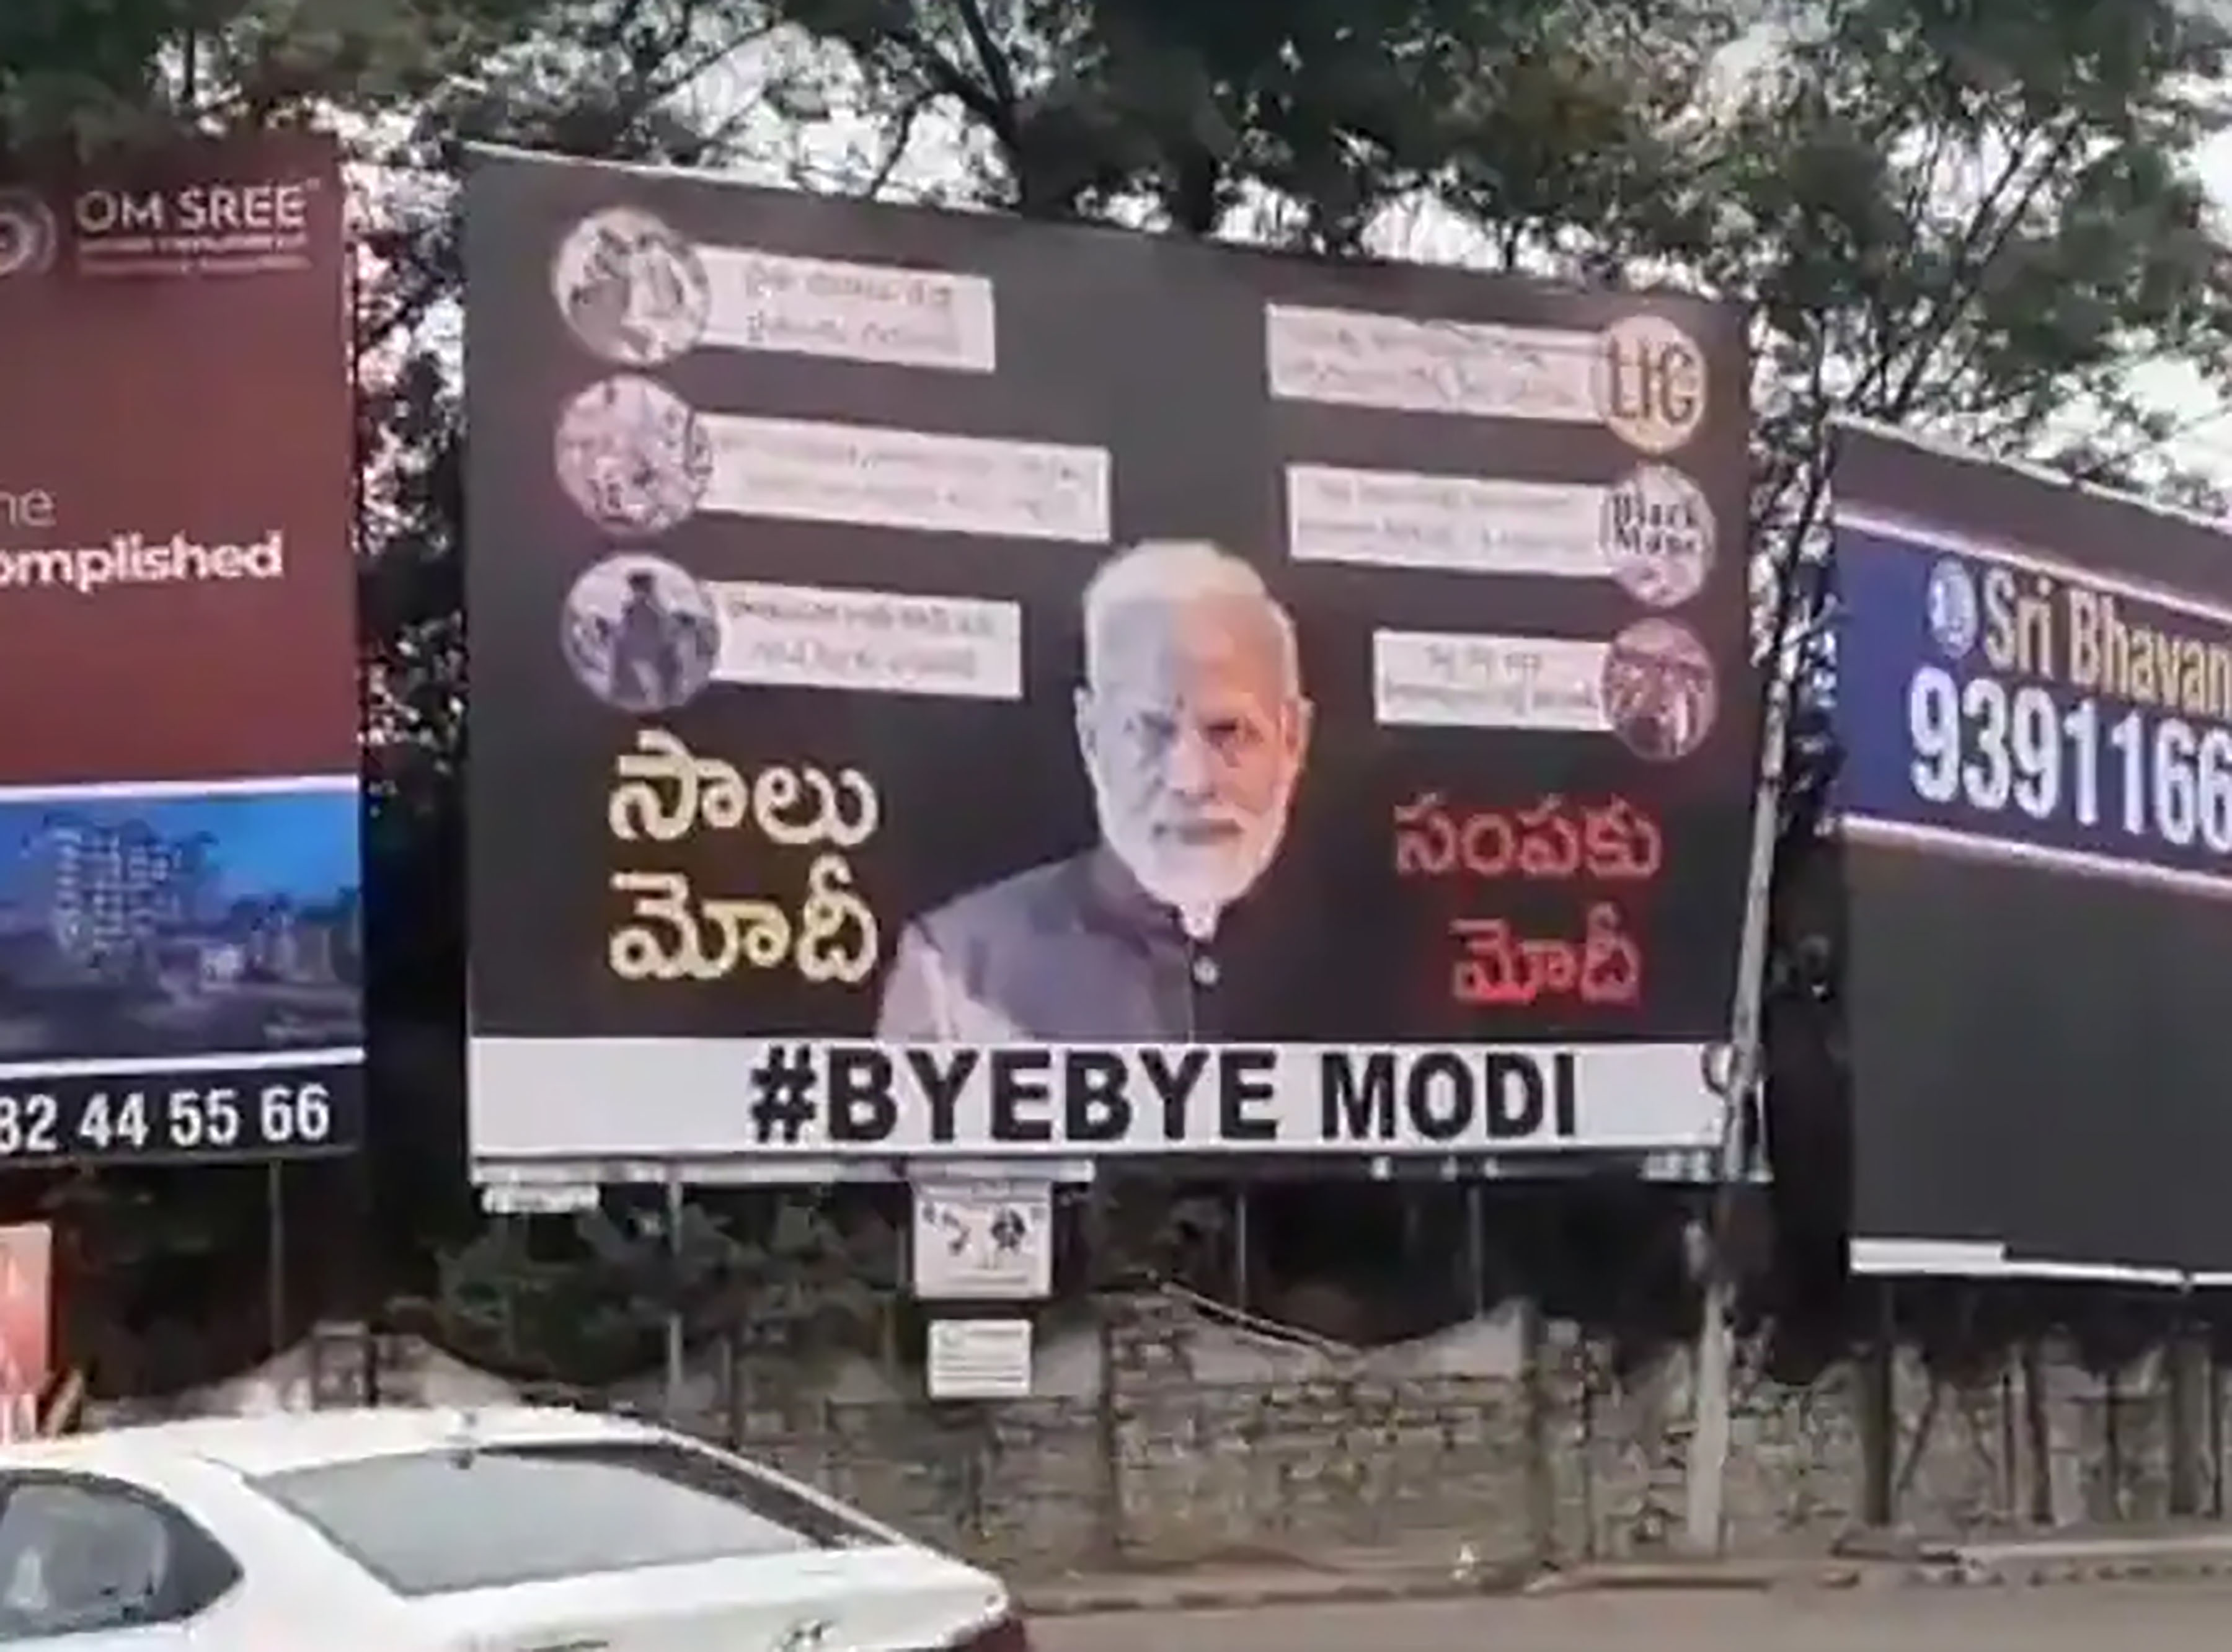 Flexi of 'Bye Bye Modi' became a headache for the police   